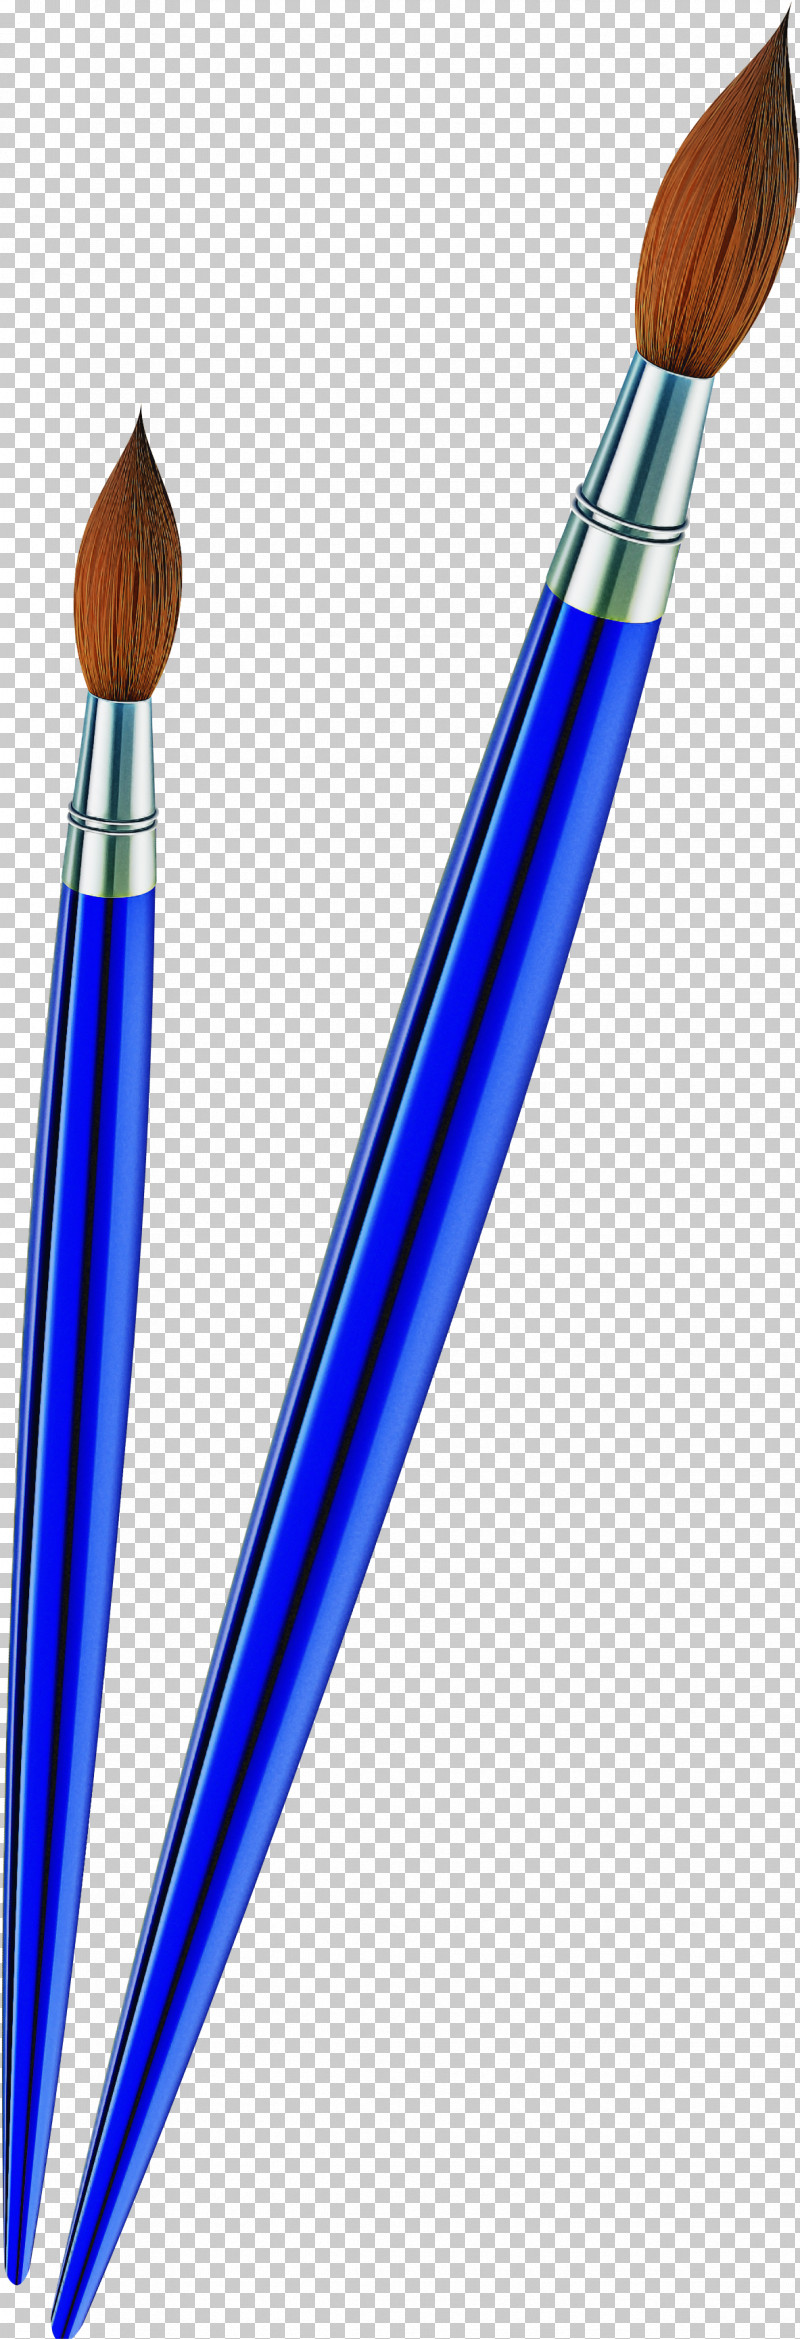 Brush Ball Pen Electric Blue Writing Implement Pen PNG, Clipart, Ball Pen, Brush, Electric Blue, Office Supplies, Pen Free PNG Download